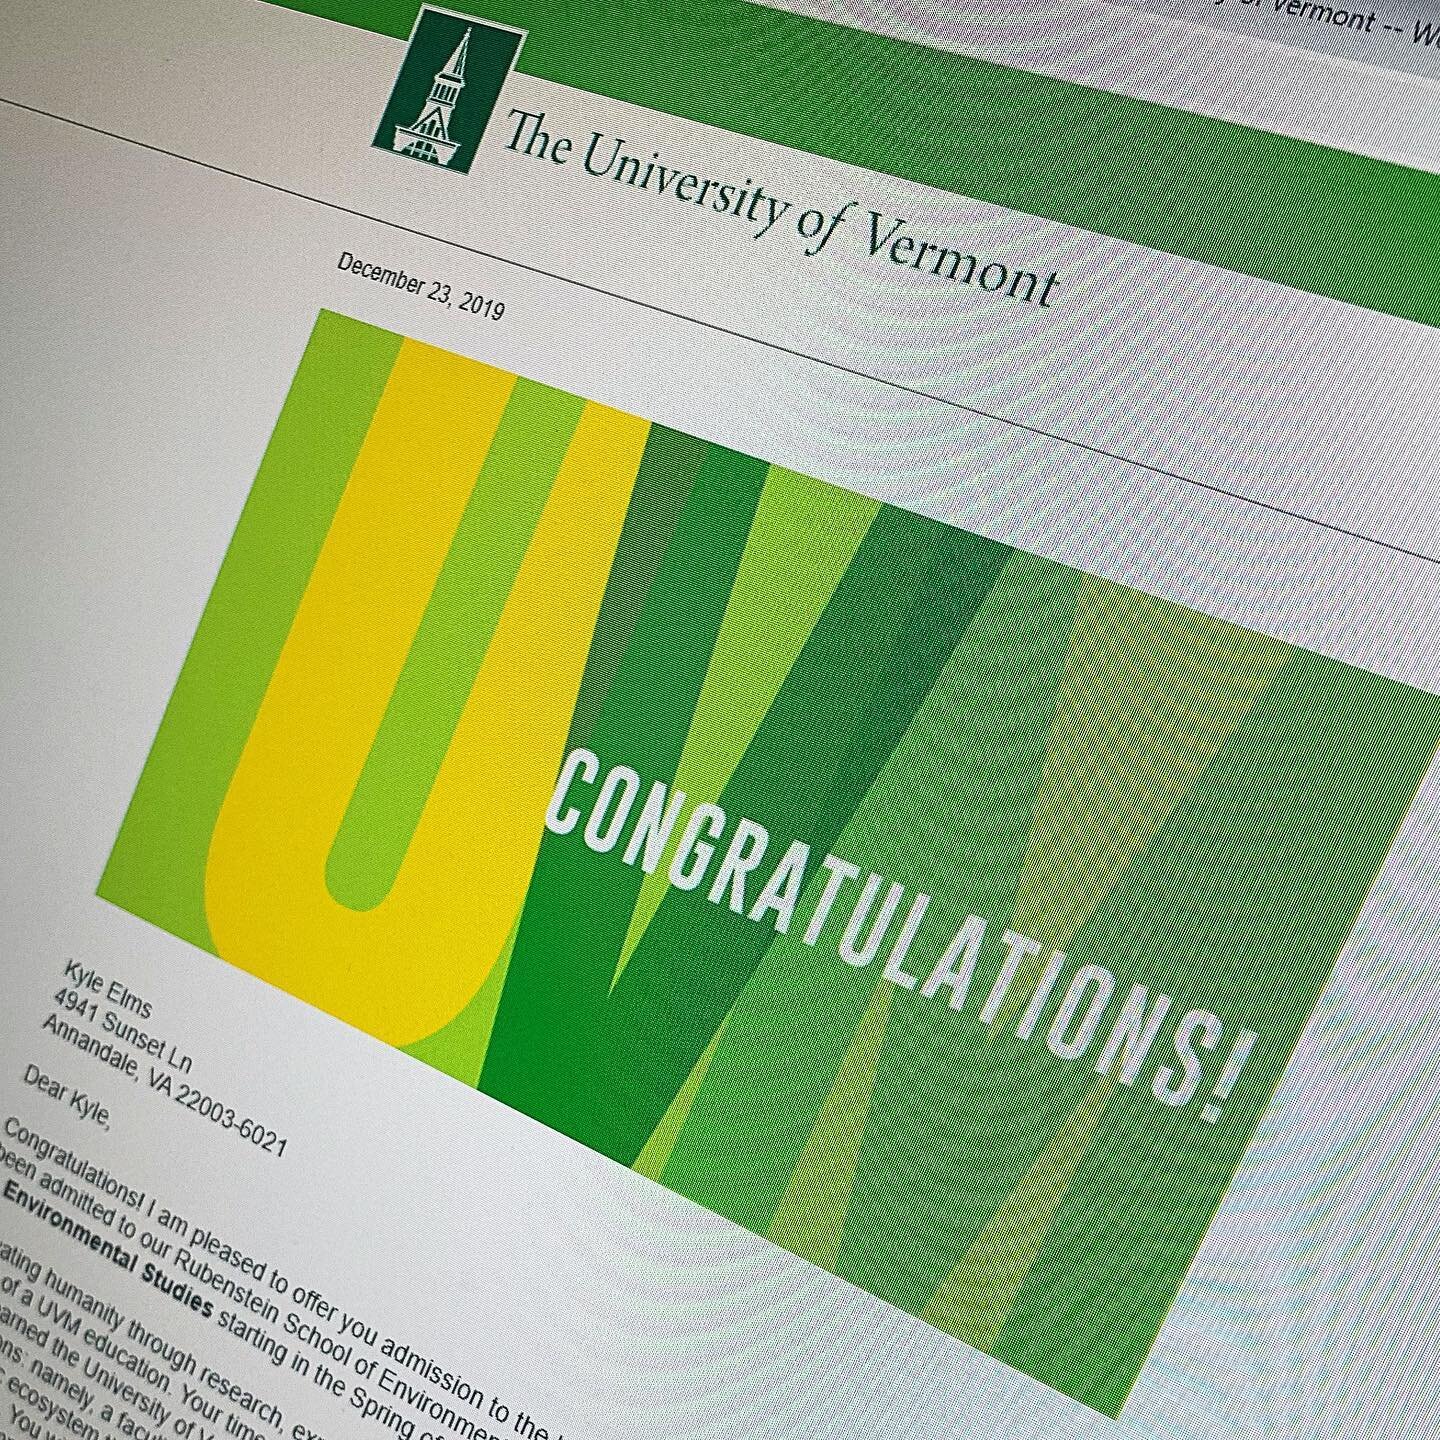 He did it! Kyle was accepted into the Environmental Studies program in the Rubenstein School of Environment &amp; Natural Resources at the University of Vermont for the Spring 2020 semester. He&rsquo;s going to be a Catamount! 🐾

Can&rsquo;t say eno